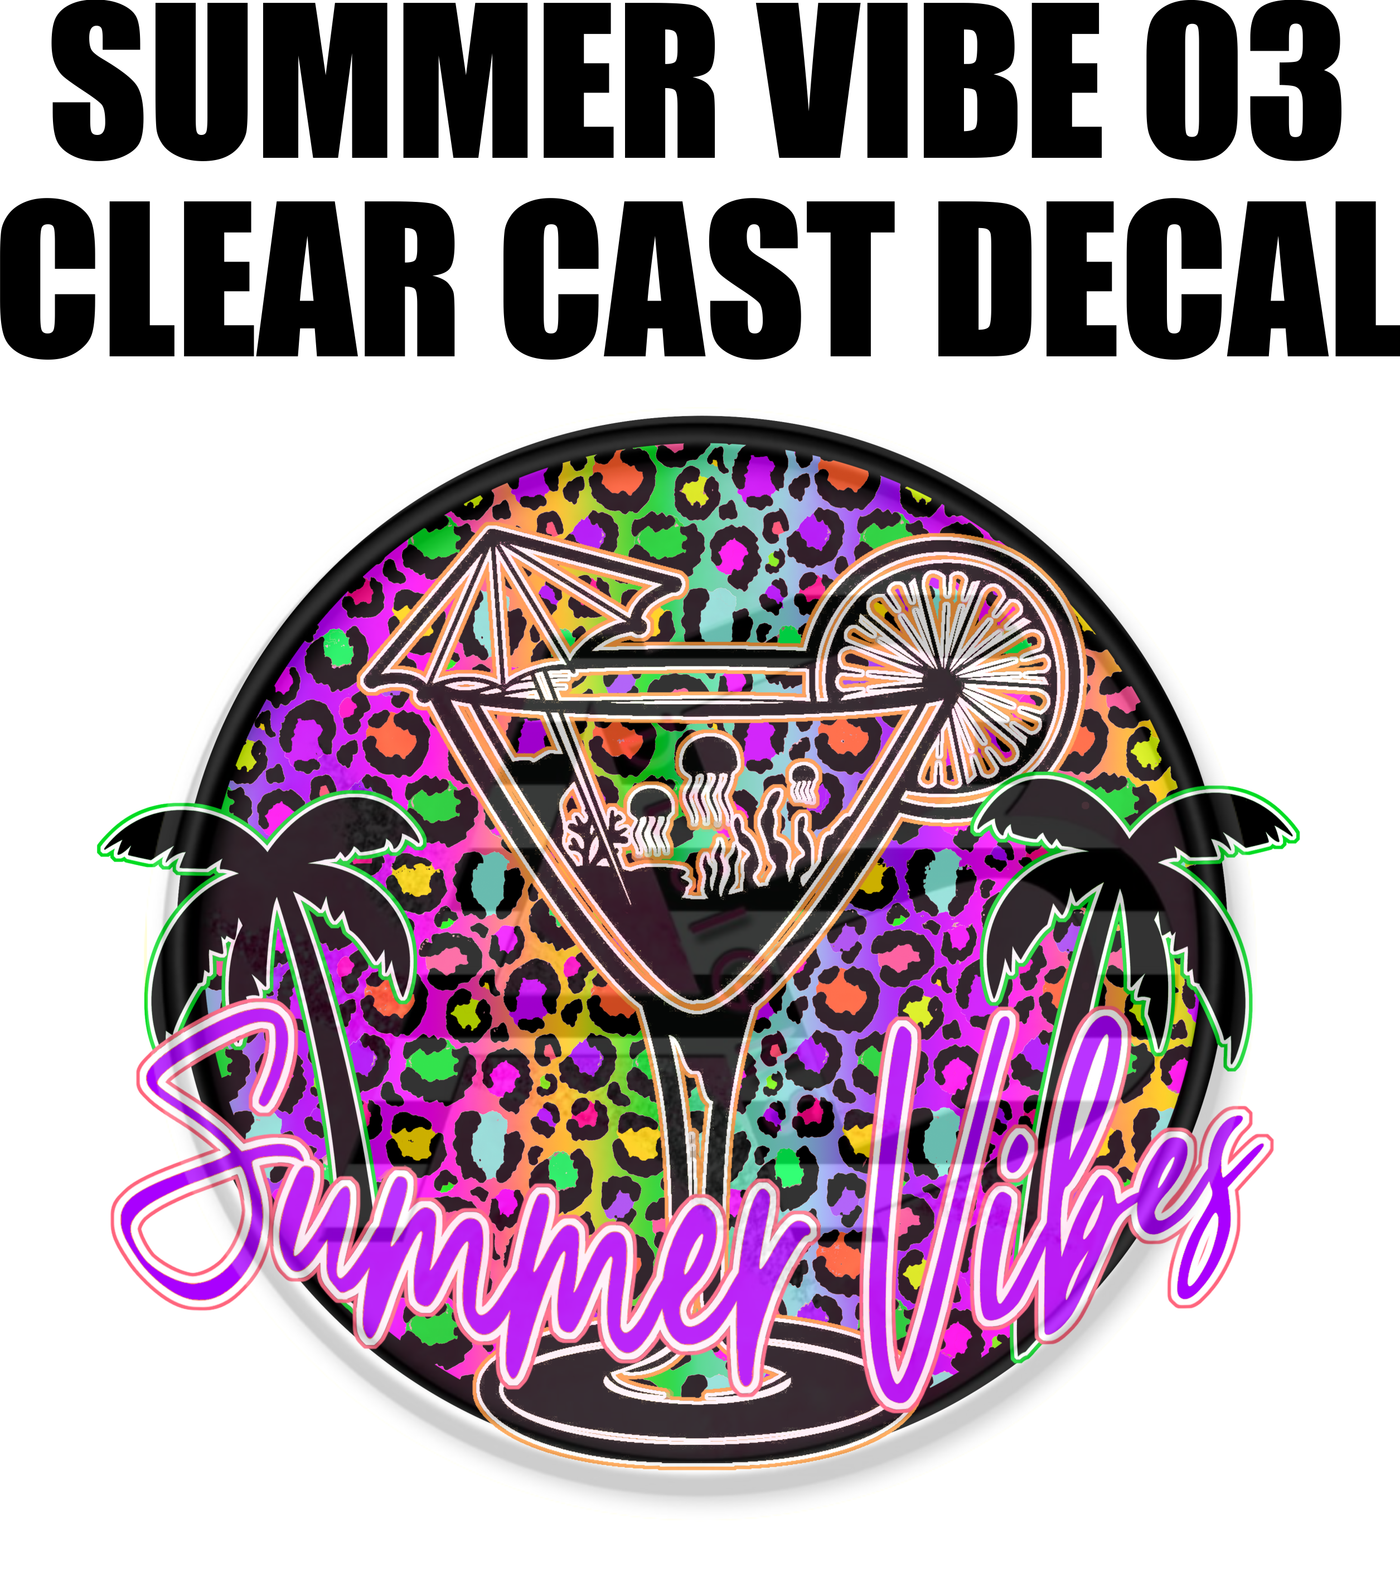 Summer Vibes 3 - Clear Cast Decal